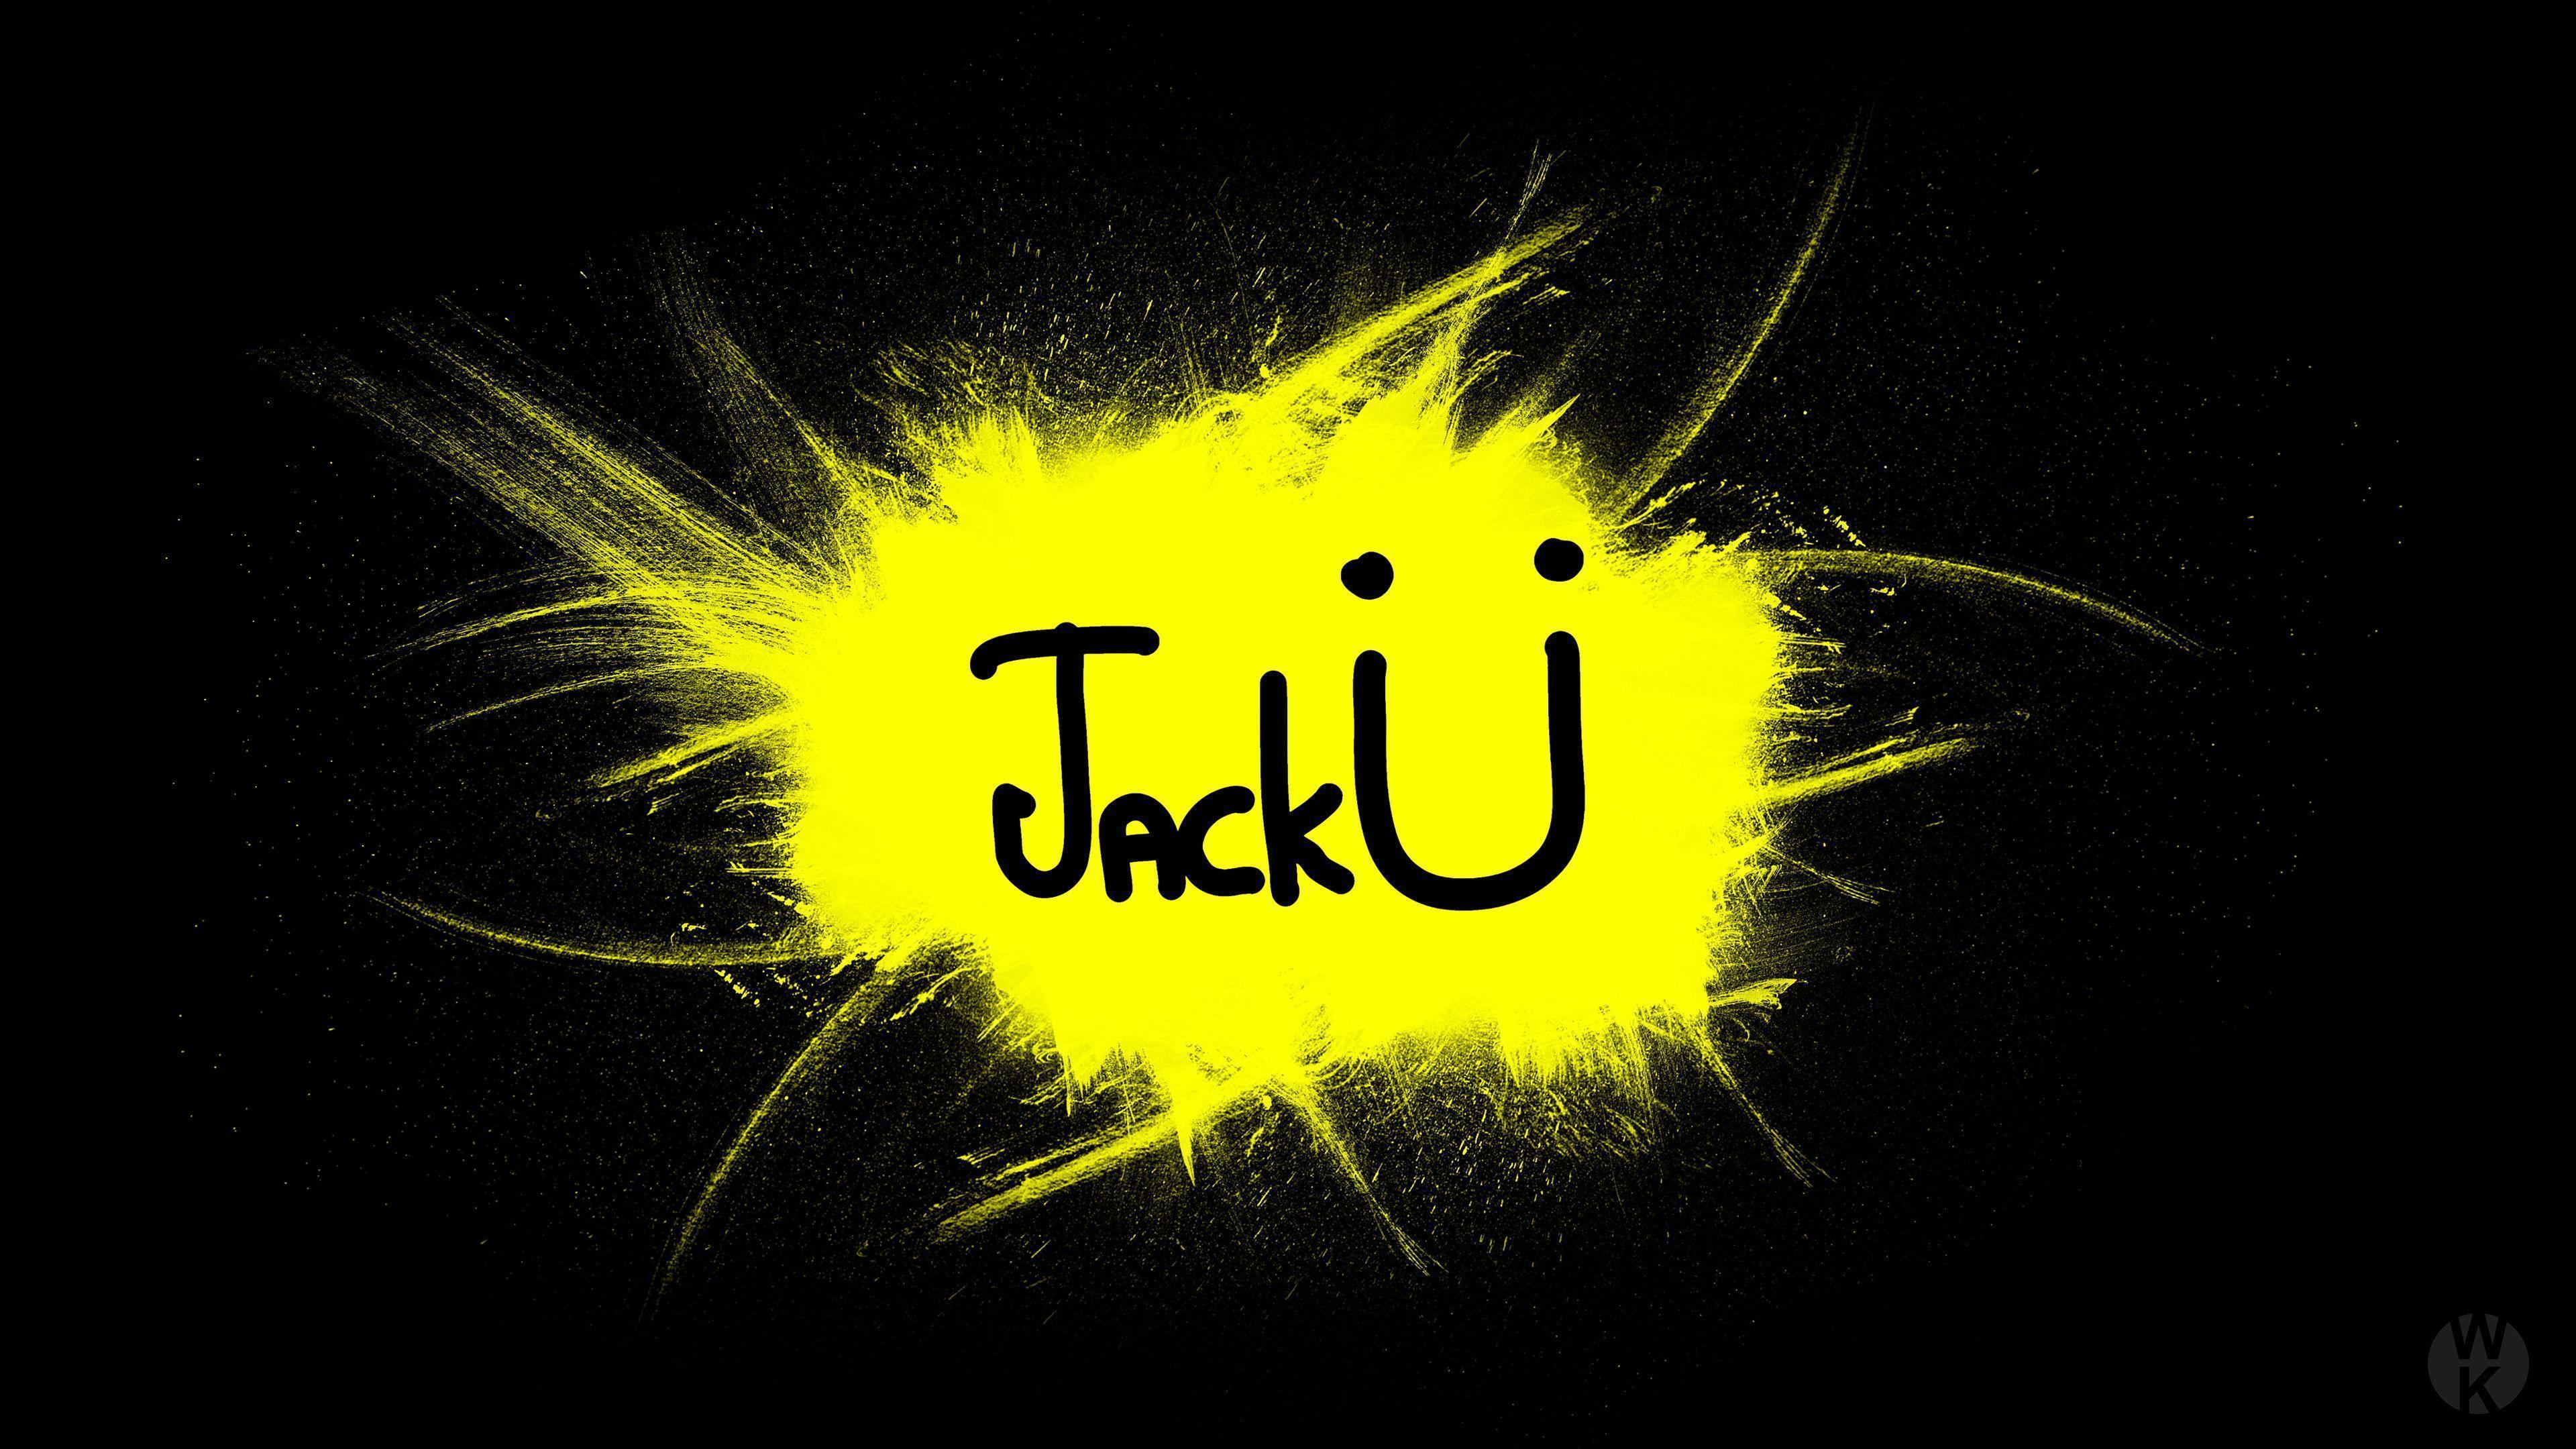 JACK Ü 4k Ultra HD Wallpaper and Background Imagex2160